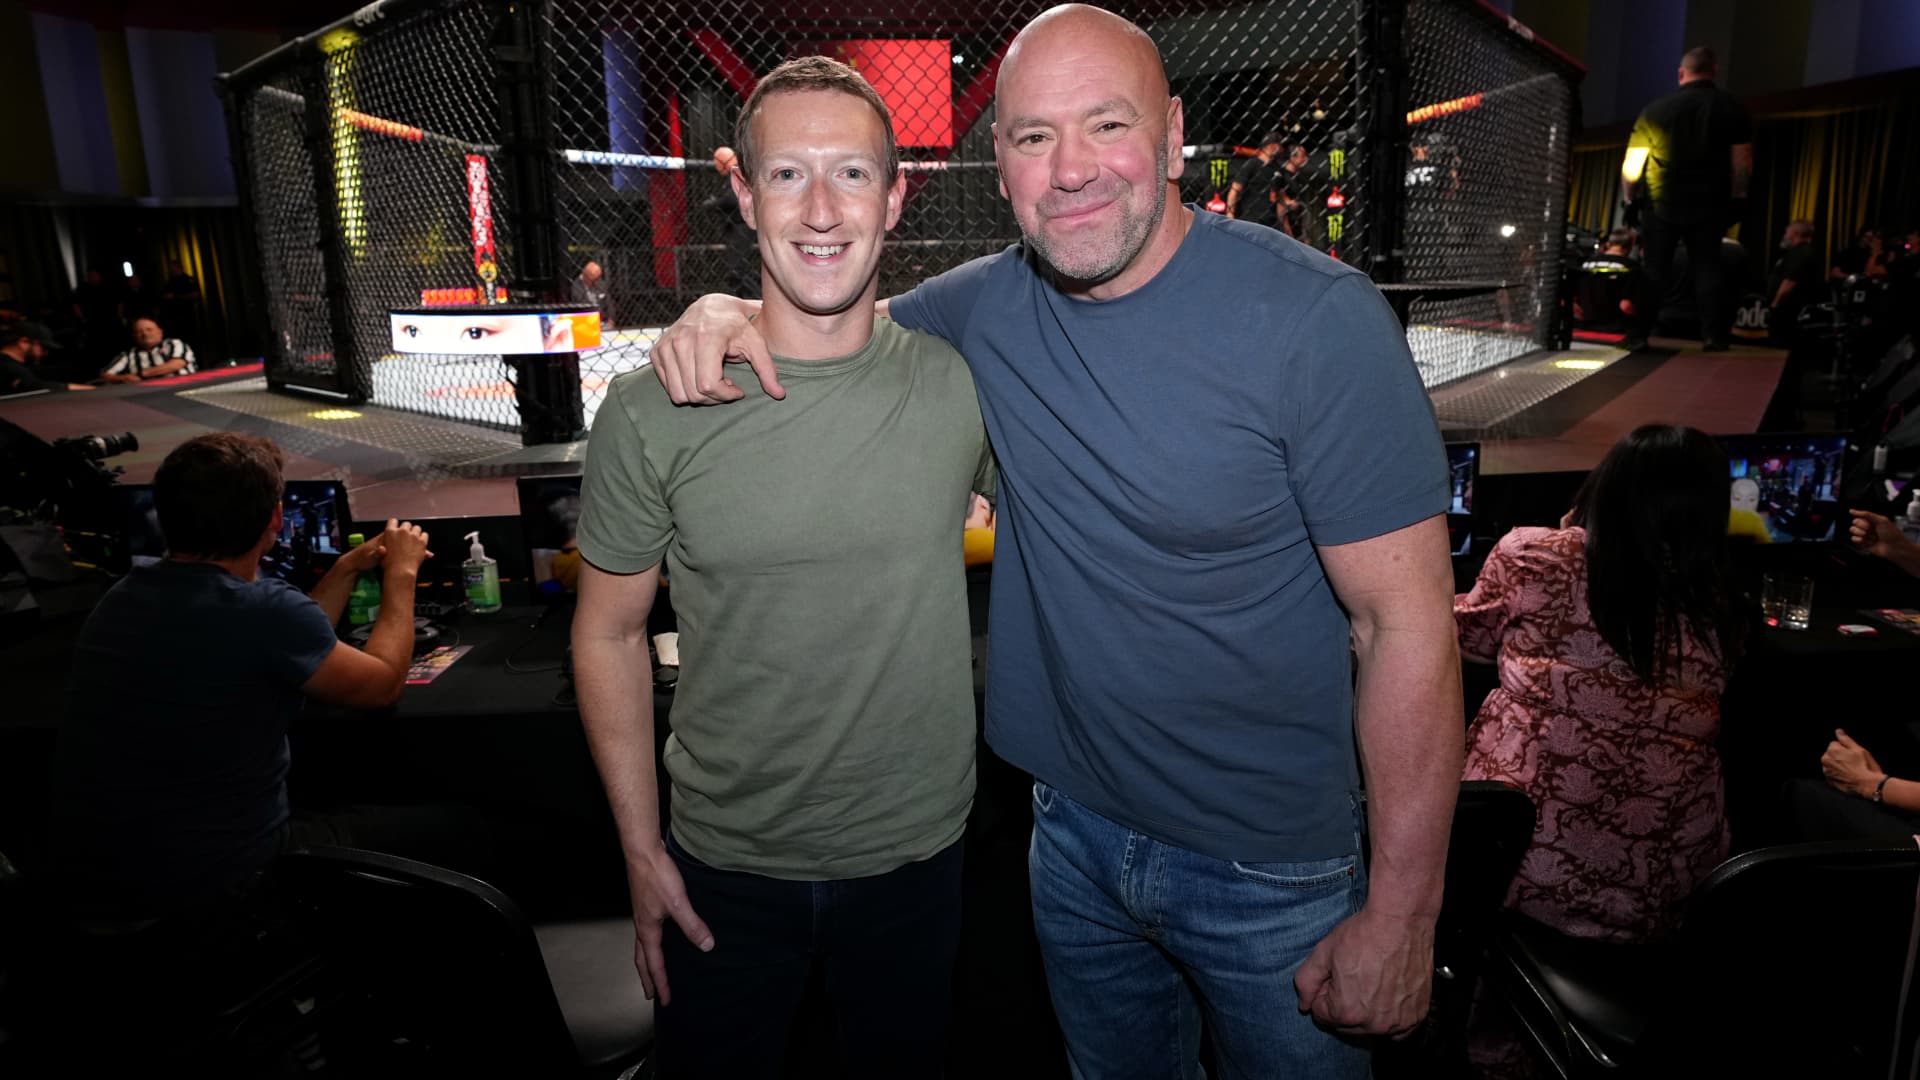 Musk-Zuckerberg ‘cage match’ PPV would cost $100, bring in over $1 billion: ‘This would be the biggest fight ever in the history of the world’